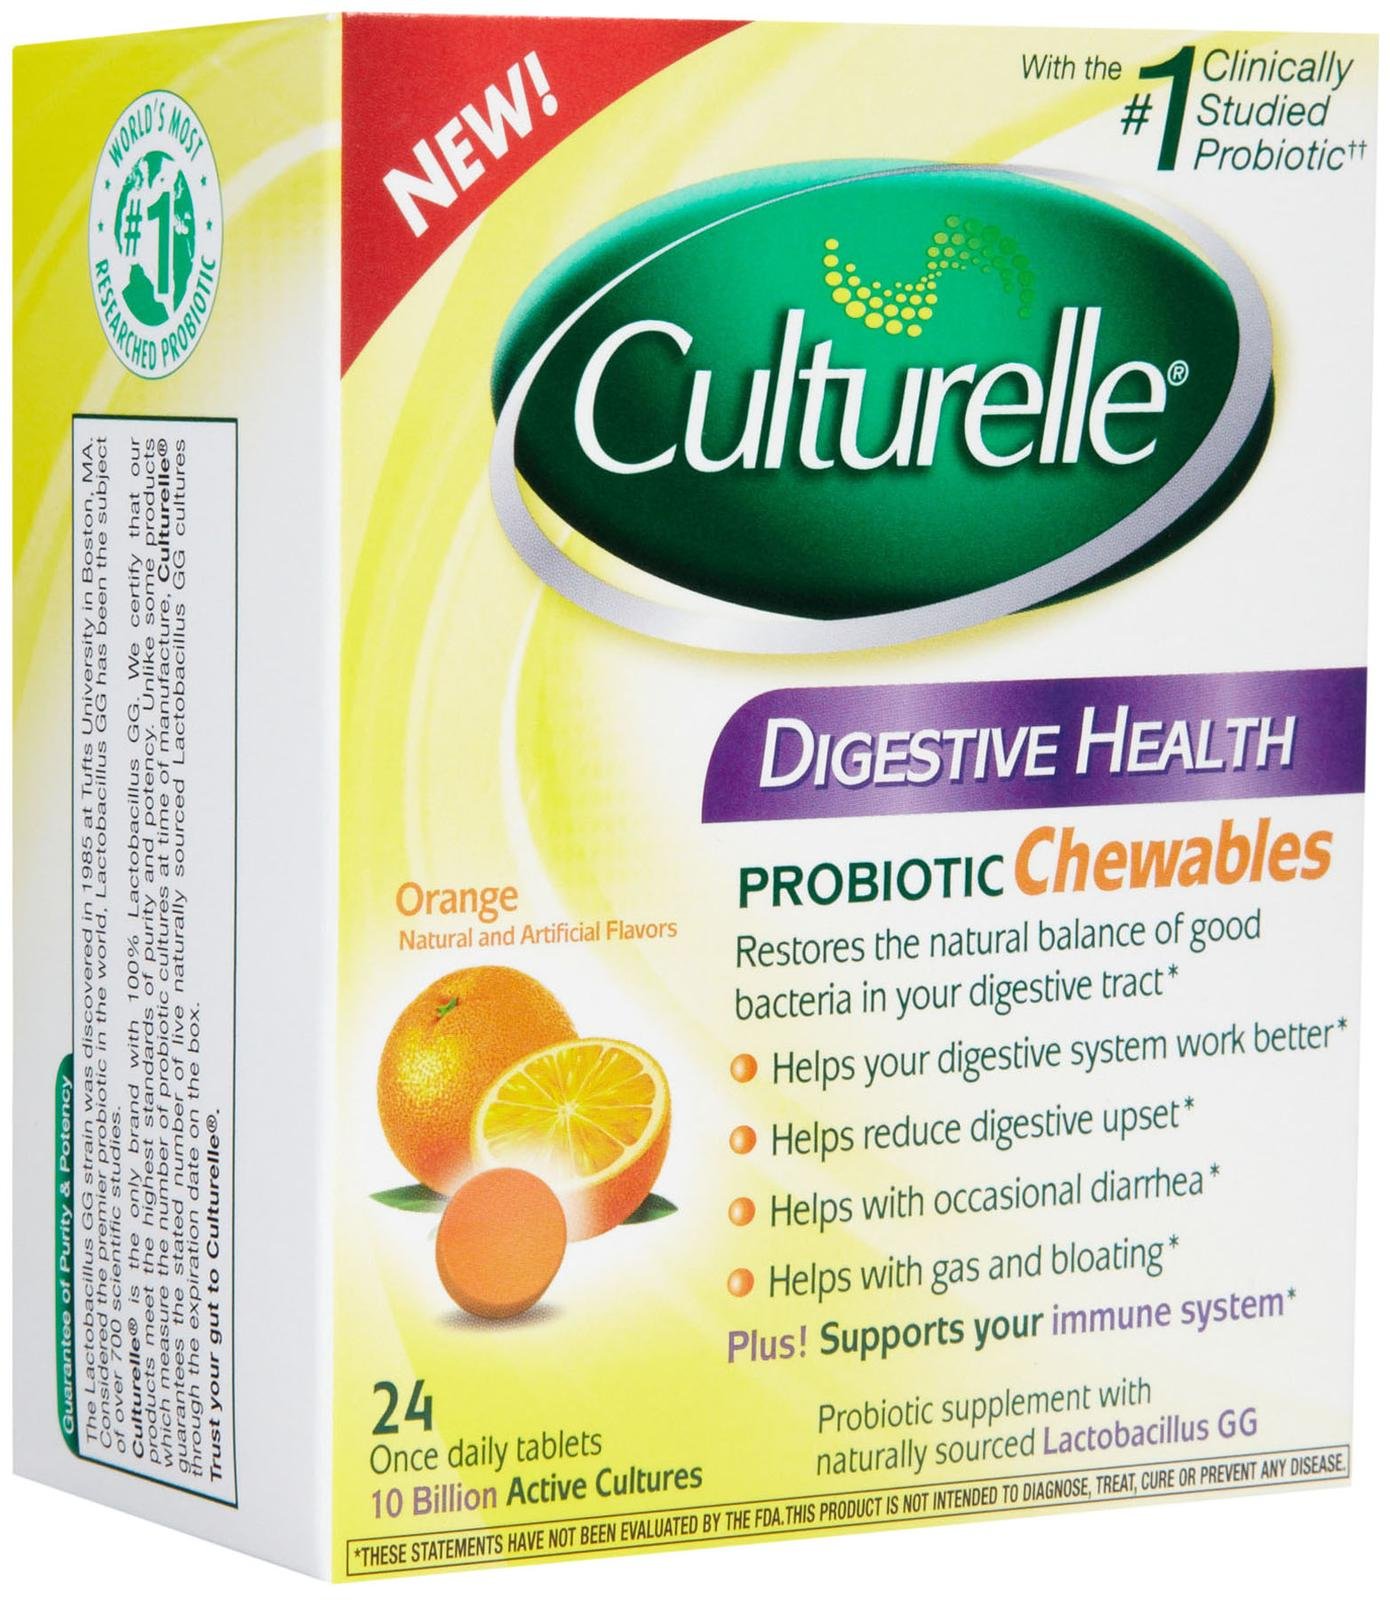 Case of 24-Culturelle Chewable Ornge Digestive Chewable 24 By I-Health (Culturelle) USA 